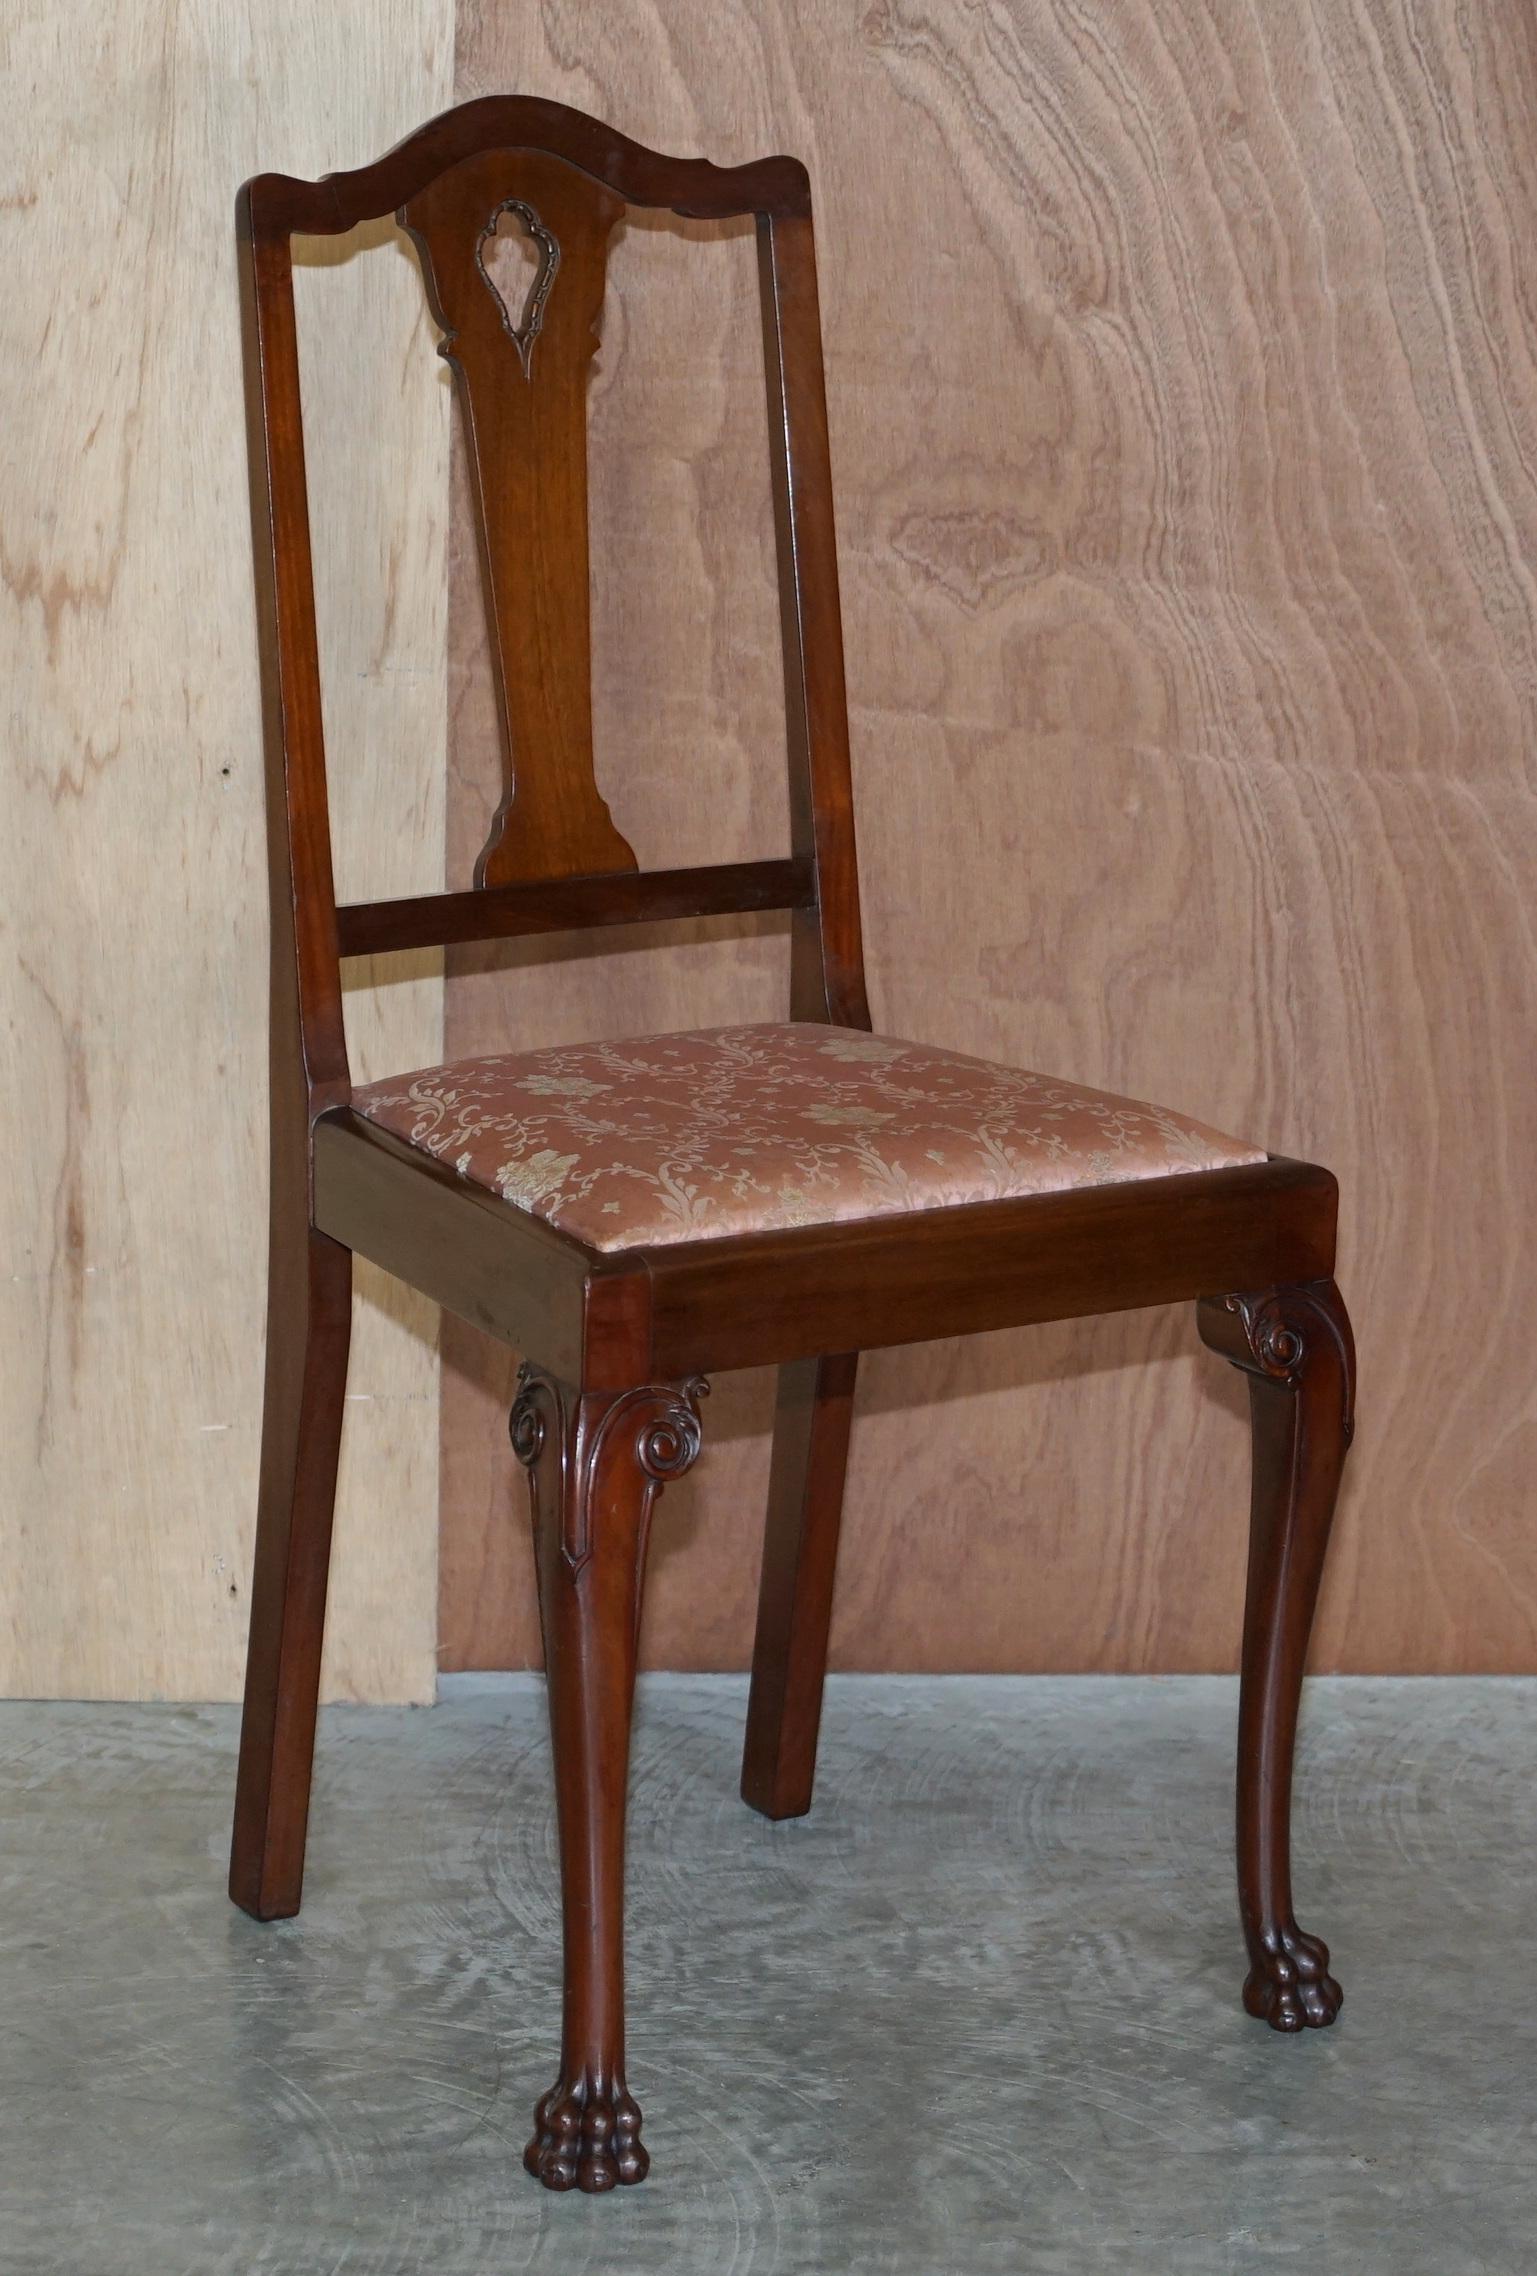 We are delighted to offer for sale this stunning pair of late Victorian Honduras Mahogany side chairs with ornately carved Lion’s Hairy paw feet

These chairs are of the finest quality, the timber was extremely expensive new and was being imported